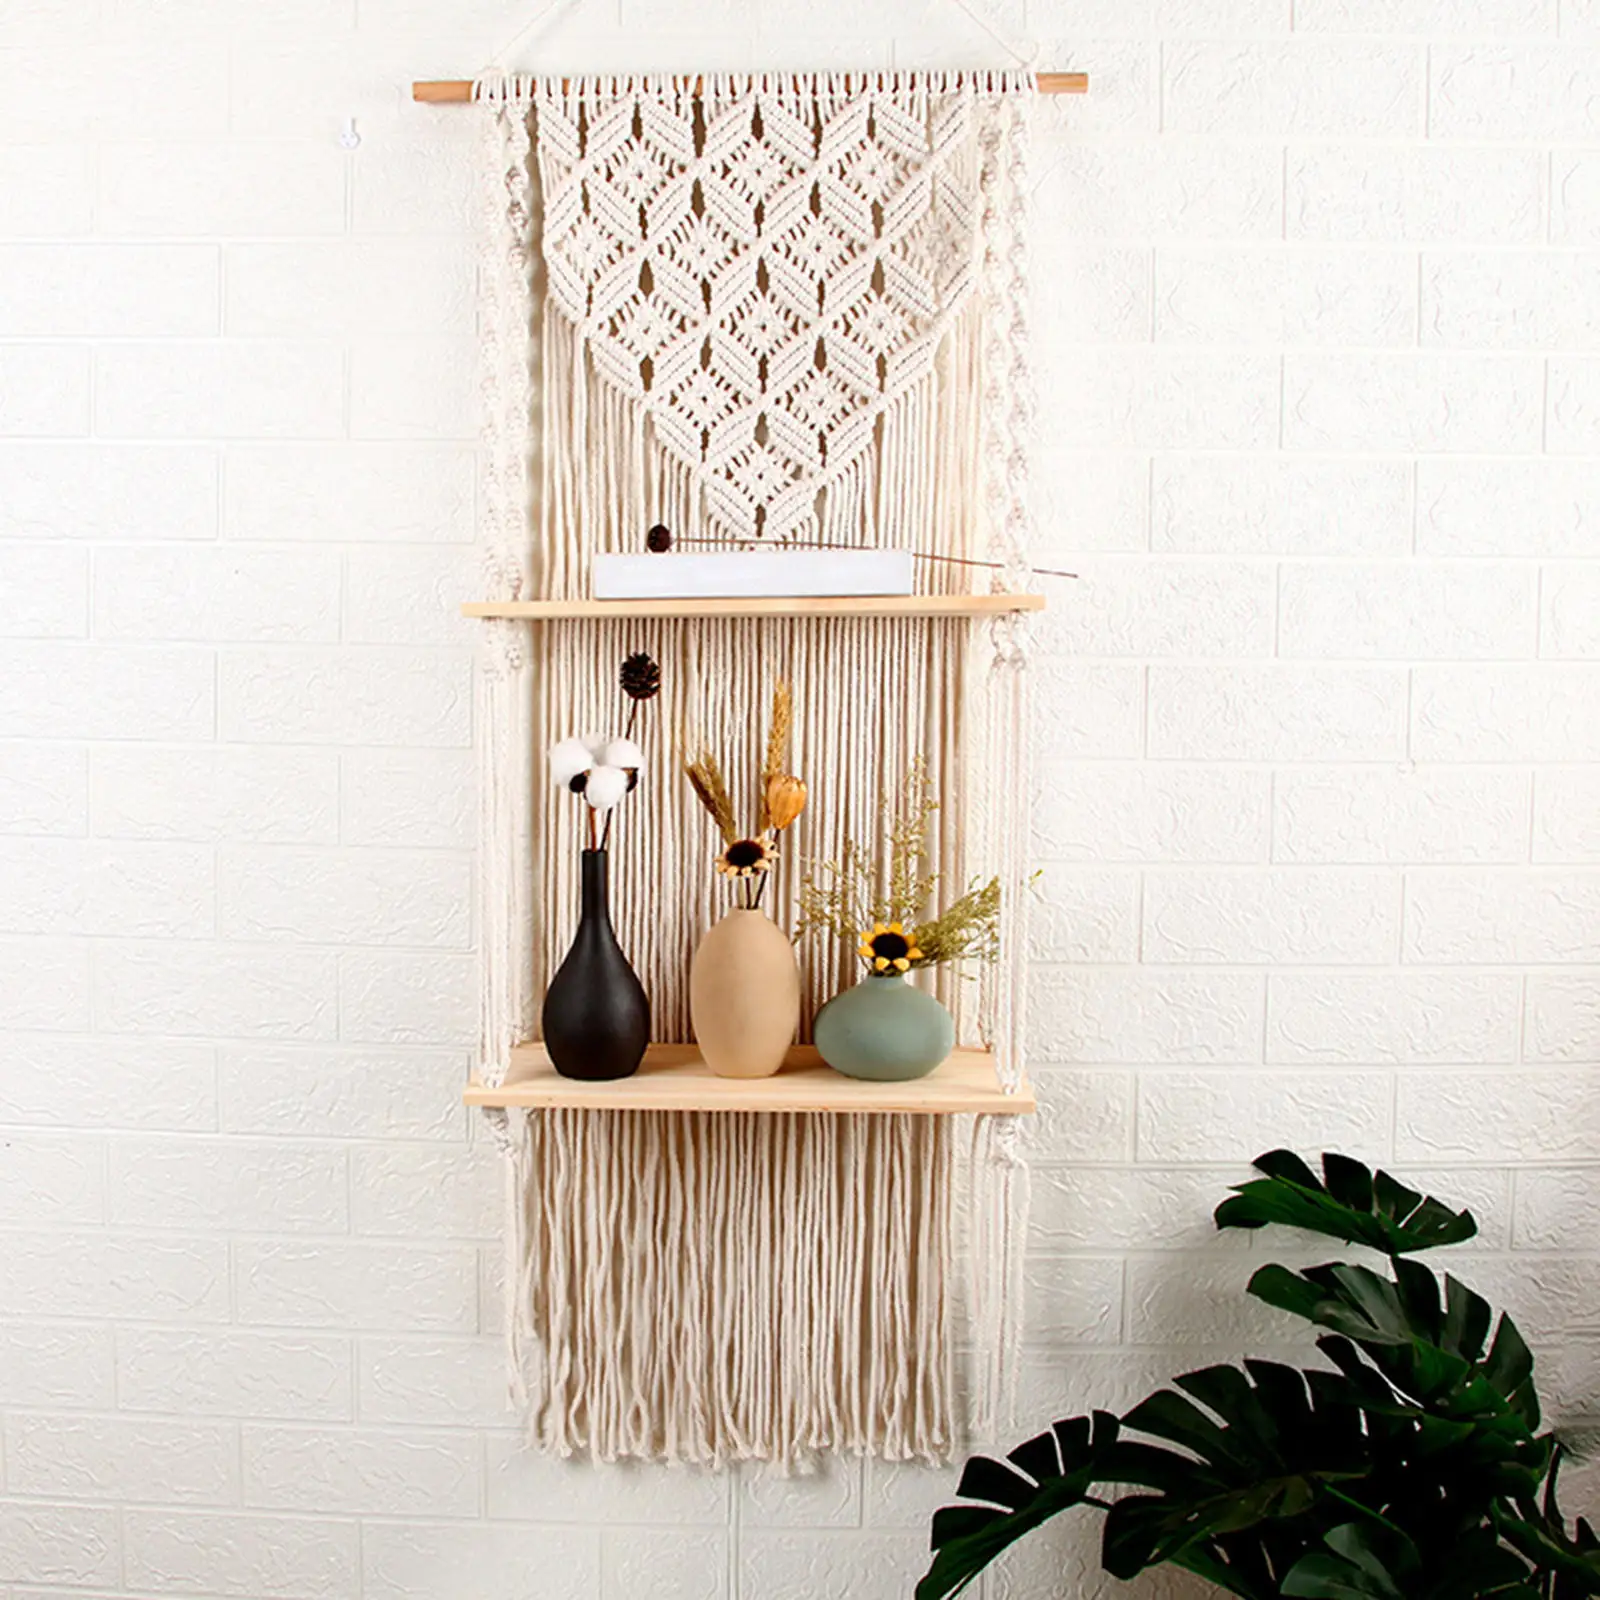 Chic Tapestry Macrame Wall Hanging Shelf Plant Display Home Organizer Books Flowerpot Woven Wood Shelf 2 Tiers Decor for Kitchen